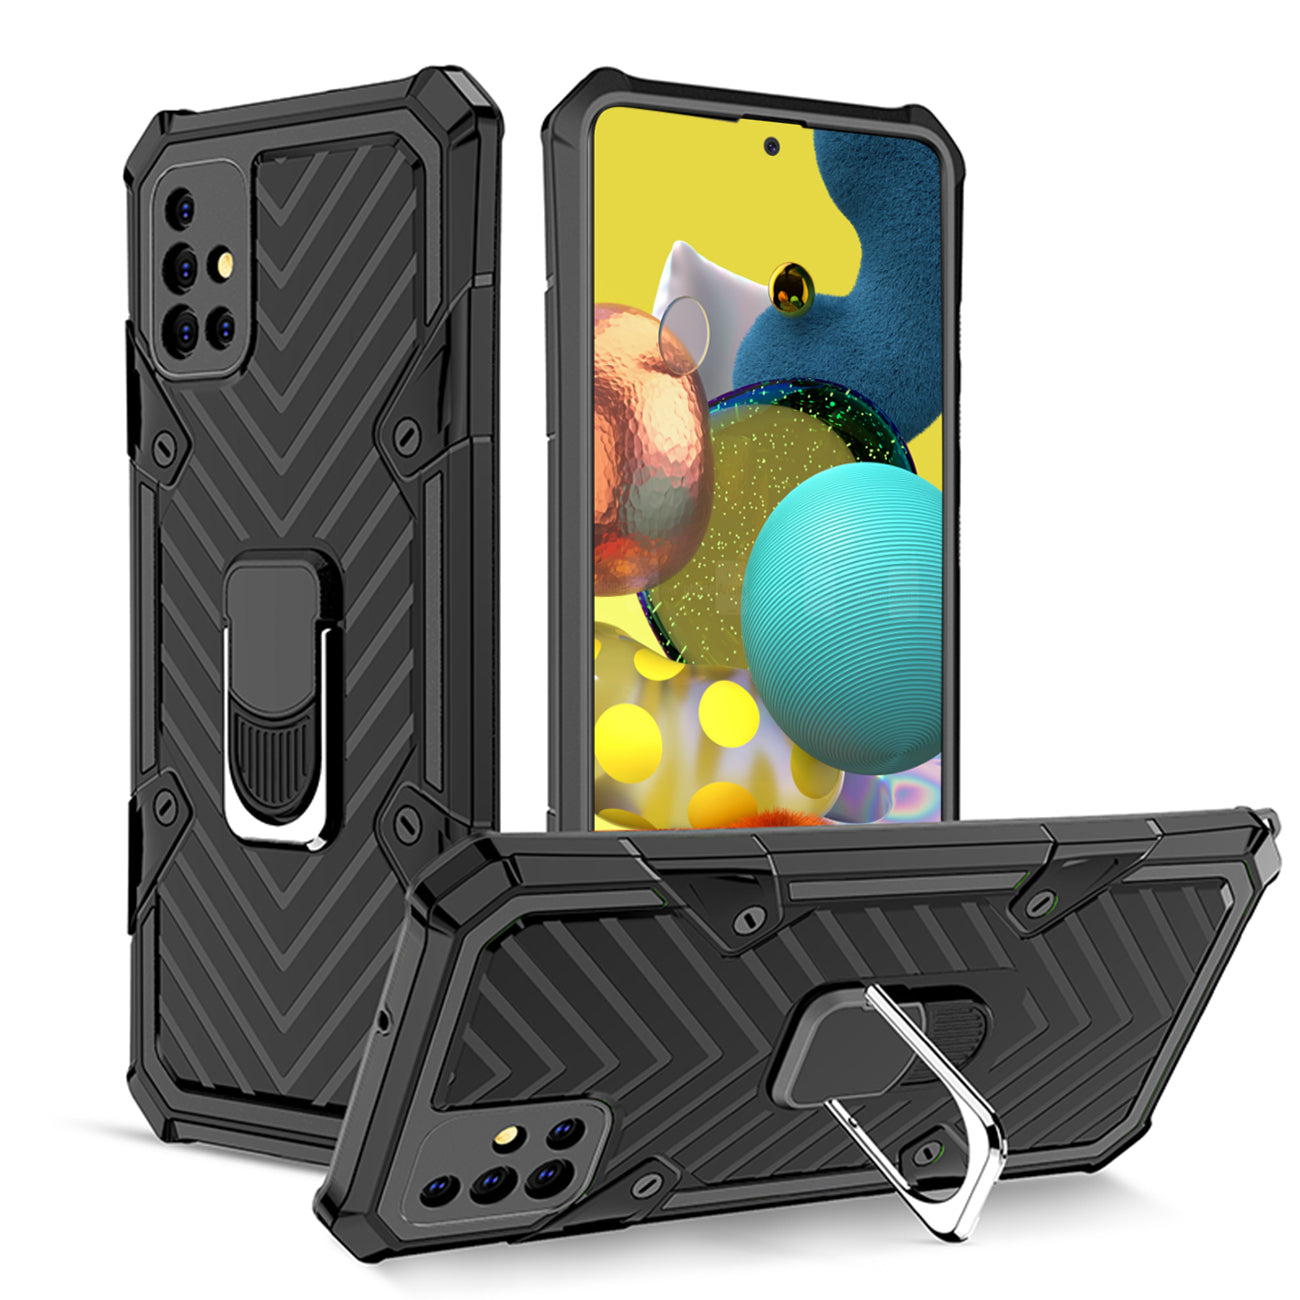 Reiko Kickstand Anti-Shock And Anti Falling Case for SAMSUNG GALAXY A51 5G In Black